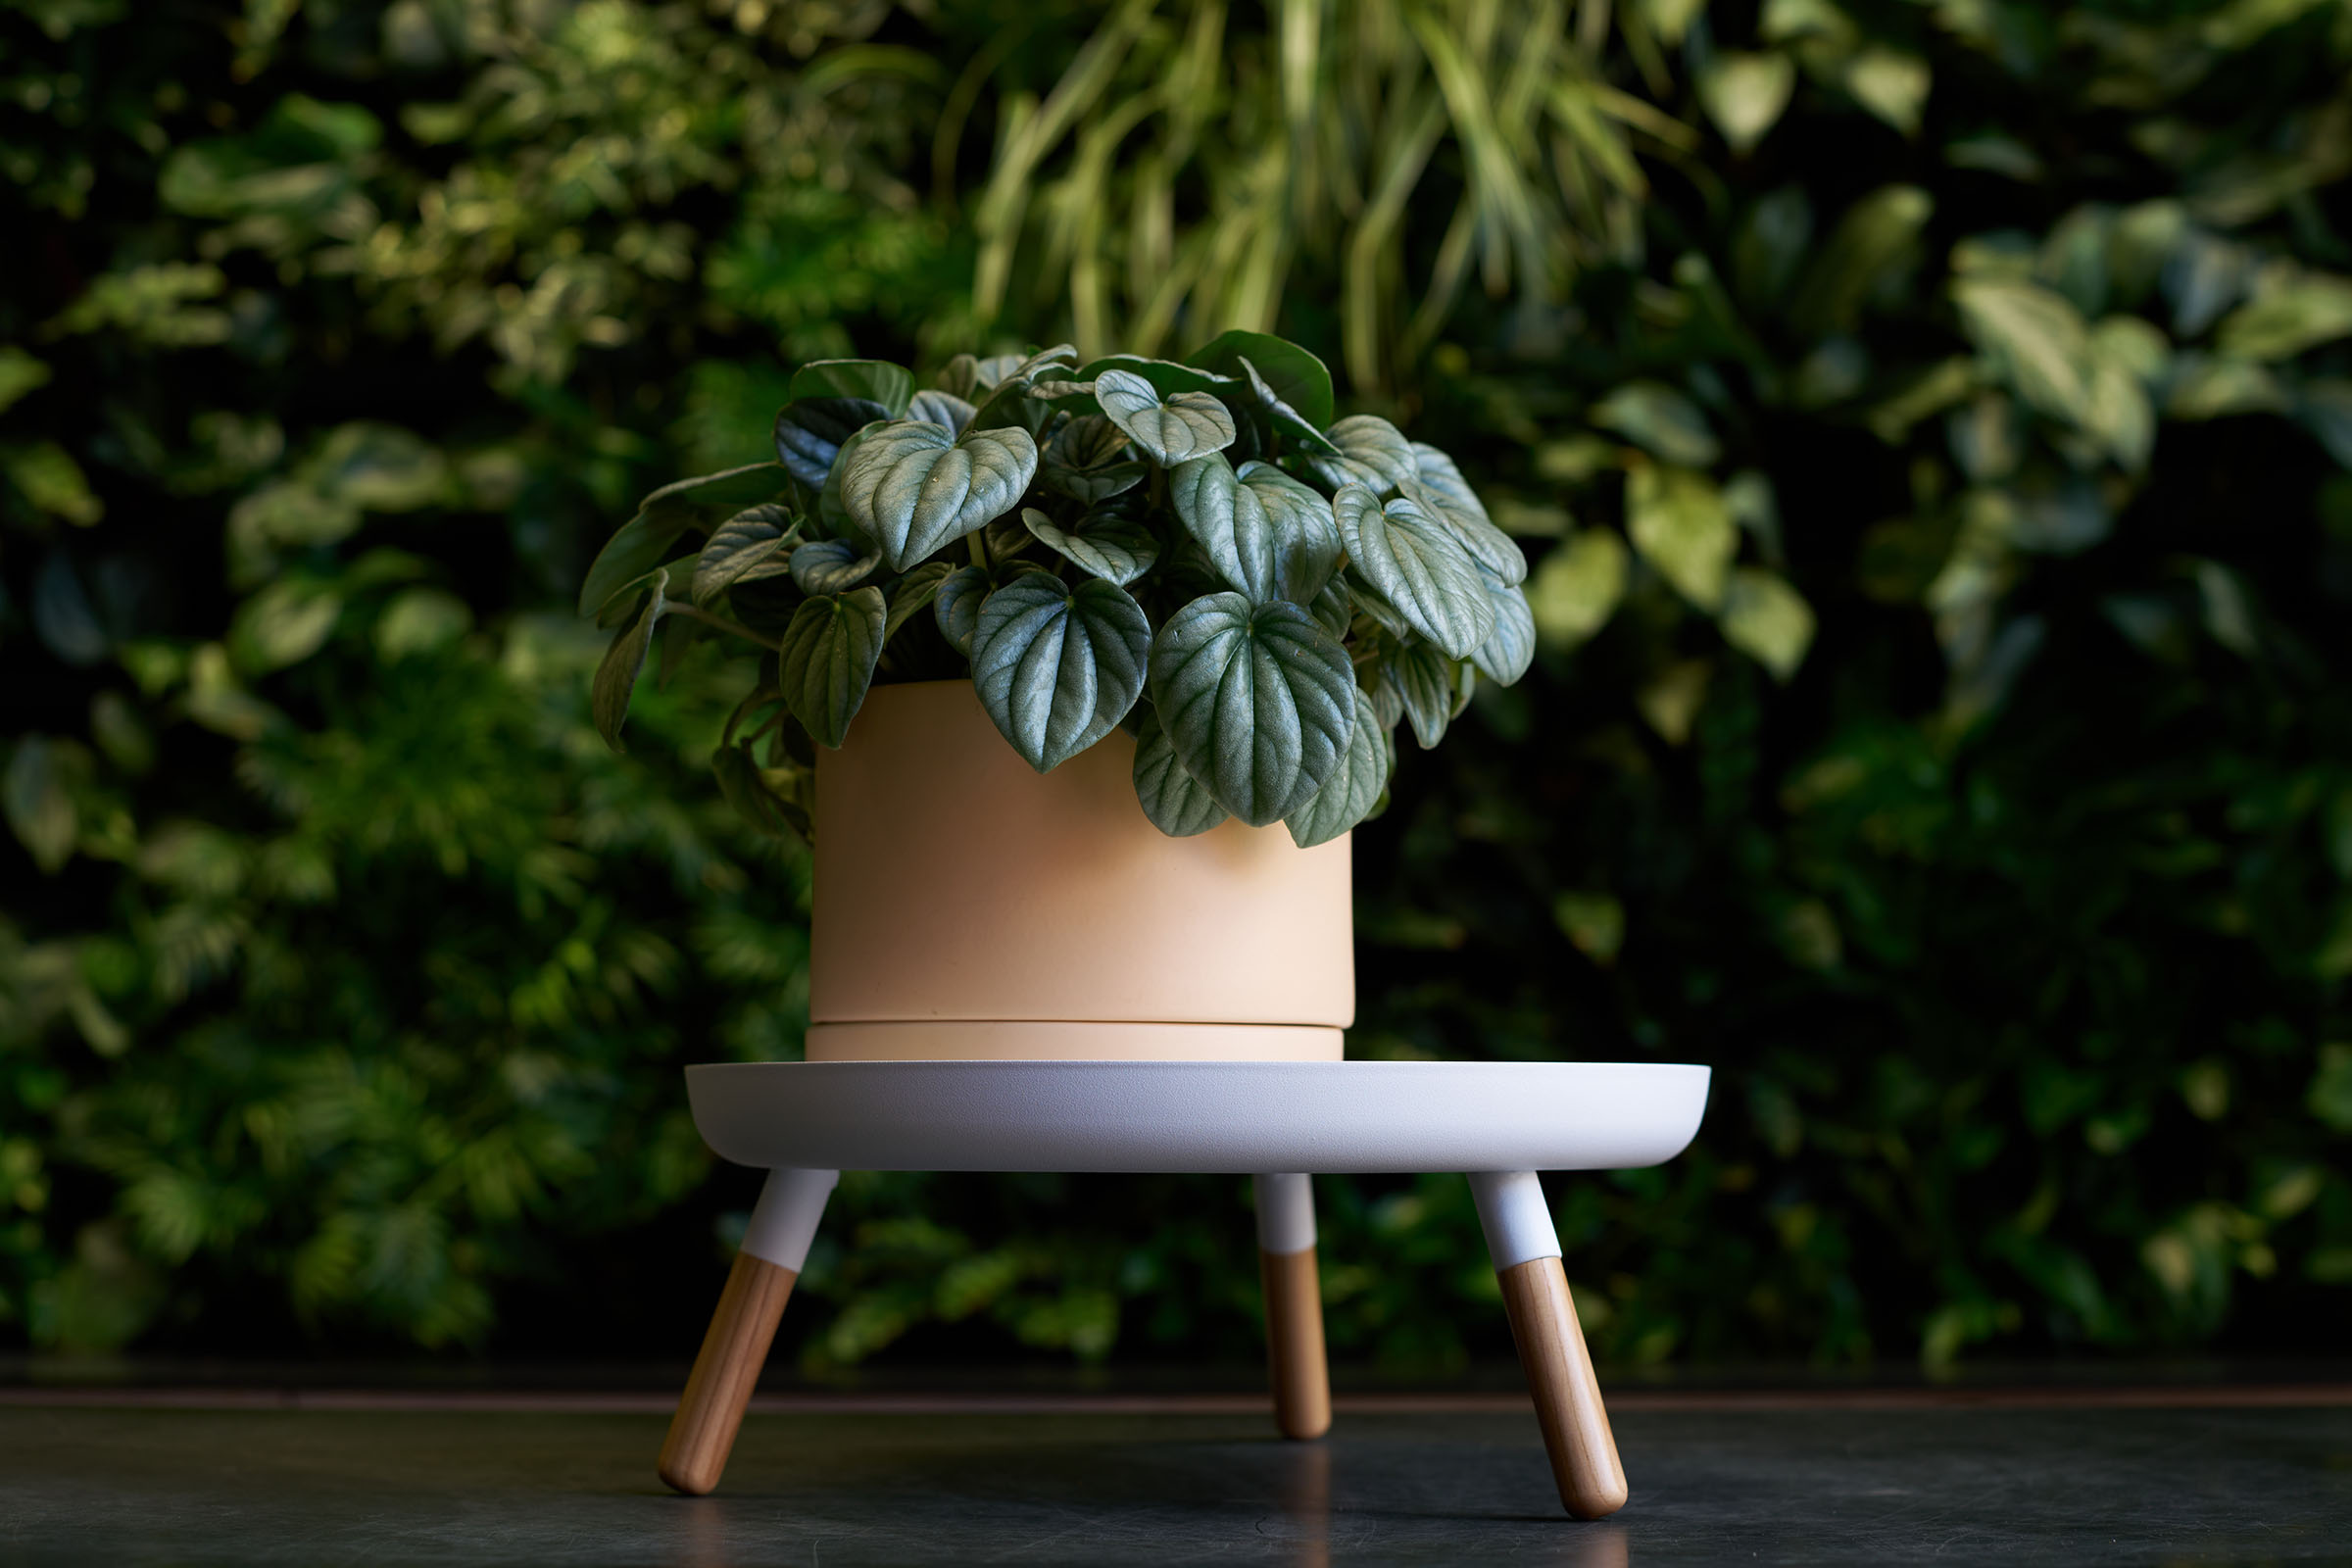 Greenery Unlimited's Franklin 17 Self Watering Planter in Pale Salmon with a plant inside, sitting atop Yamazaki Home's Countertop Pedestal Tray by Yamazaki Home in white.